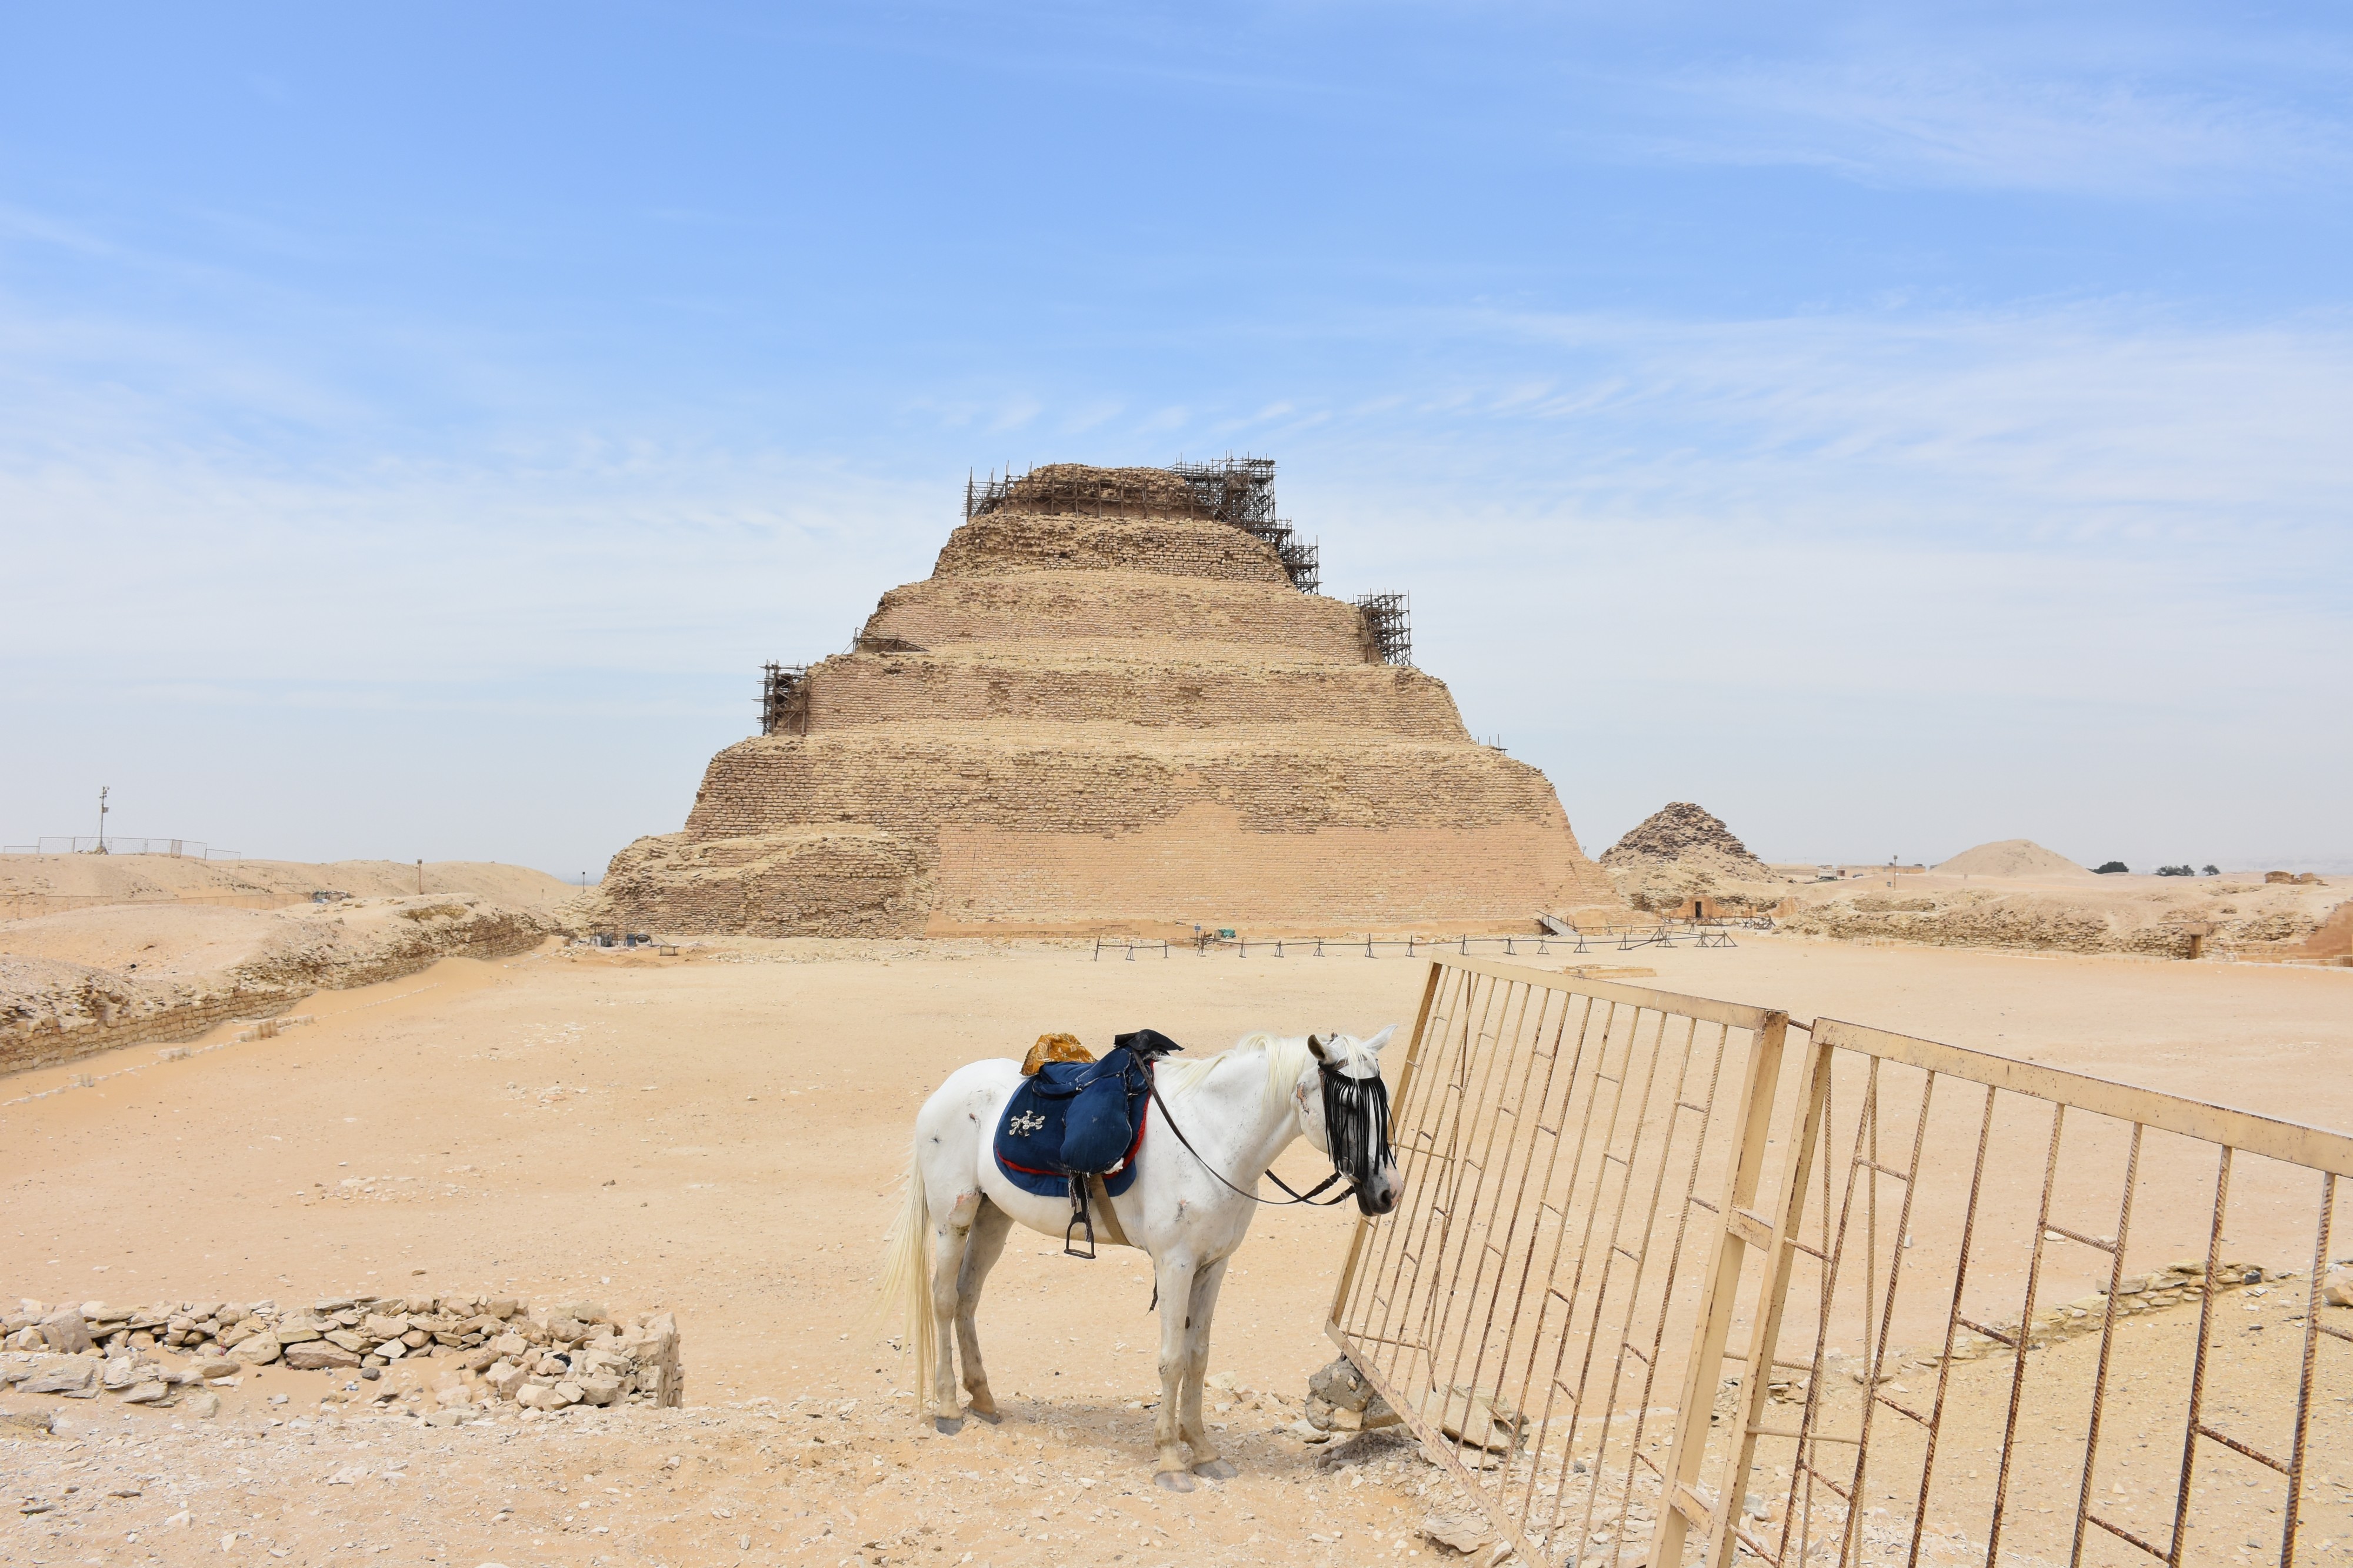 Donkey and the Pyramid of Djoser